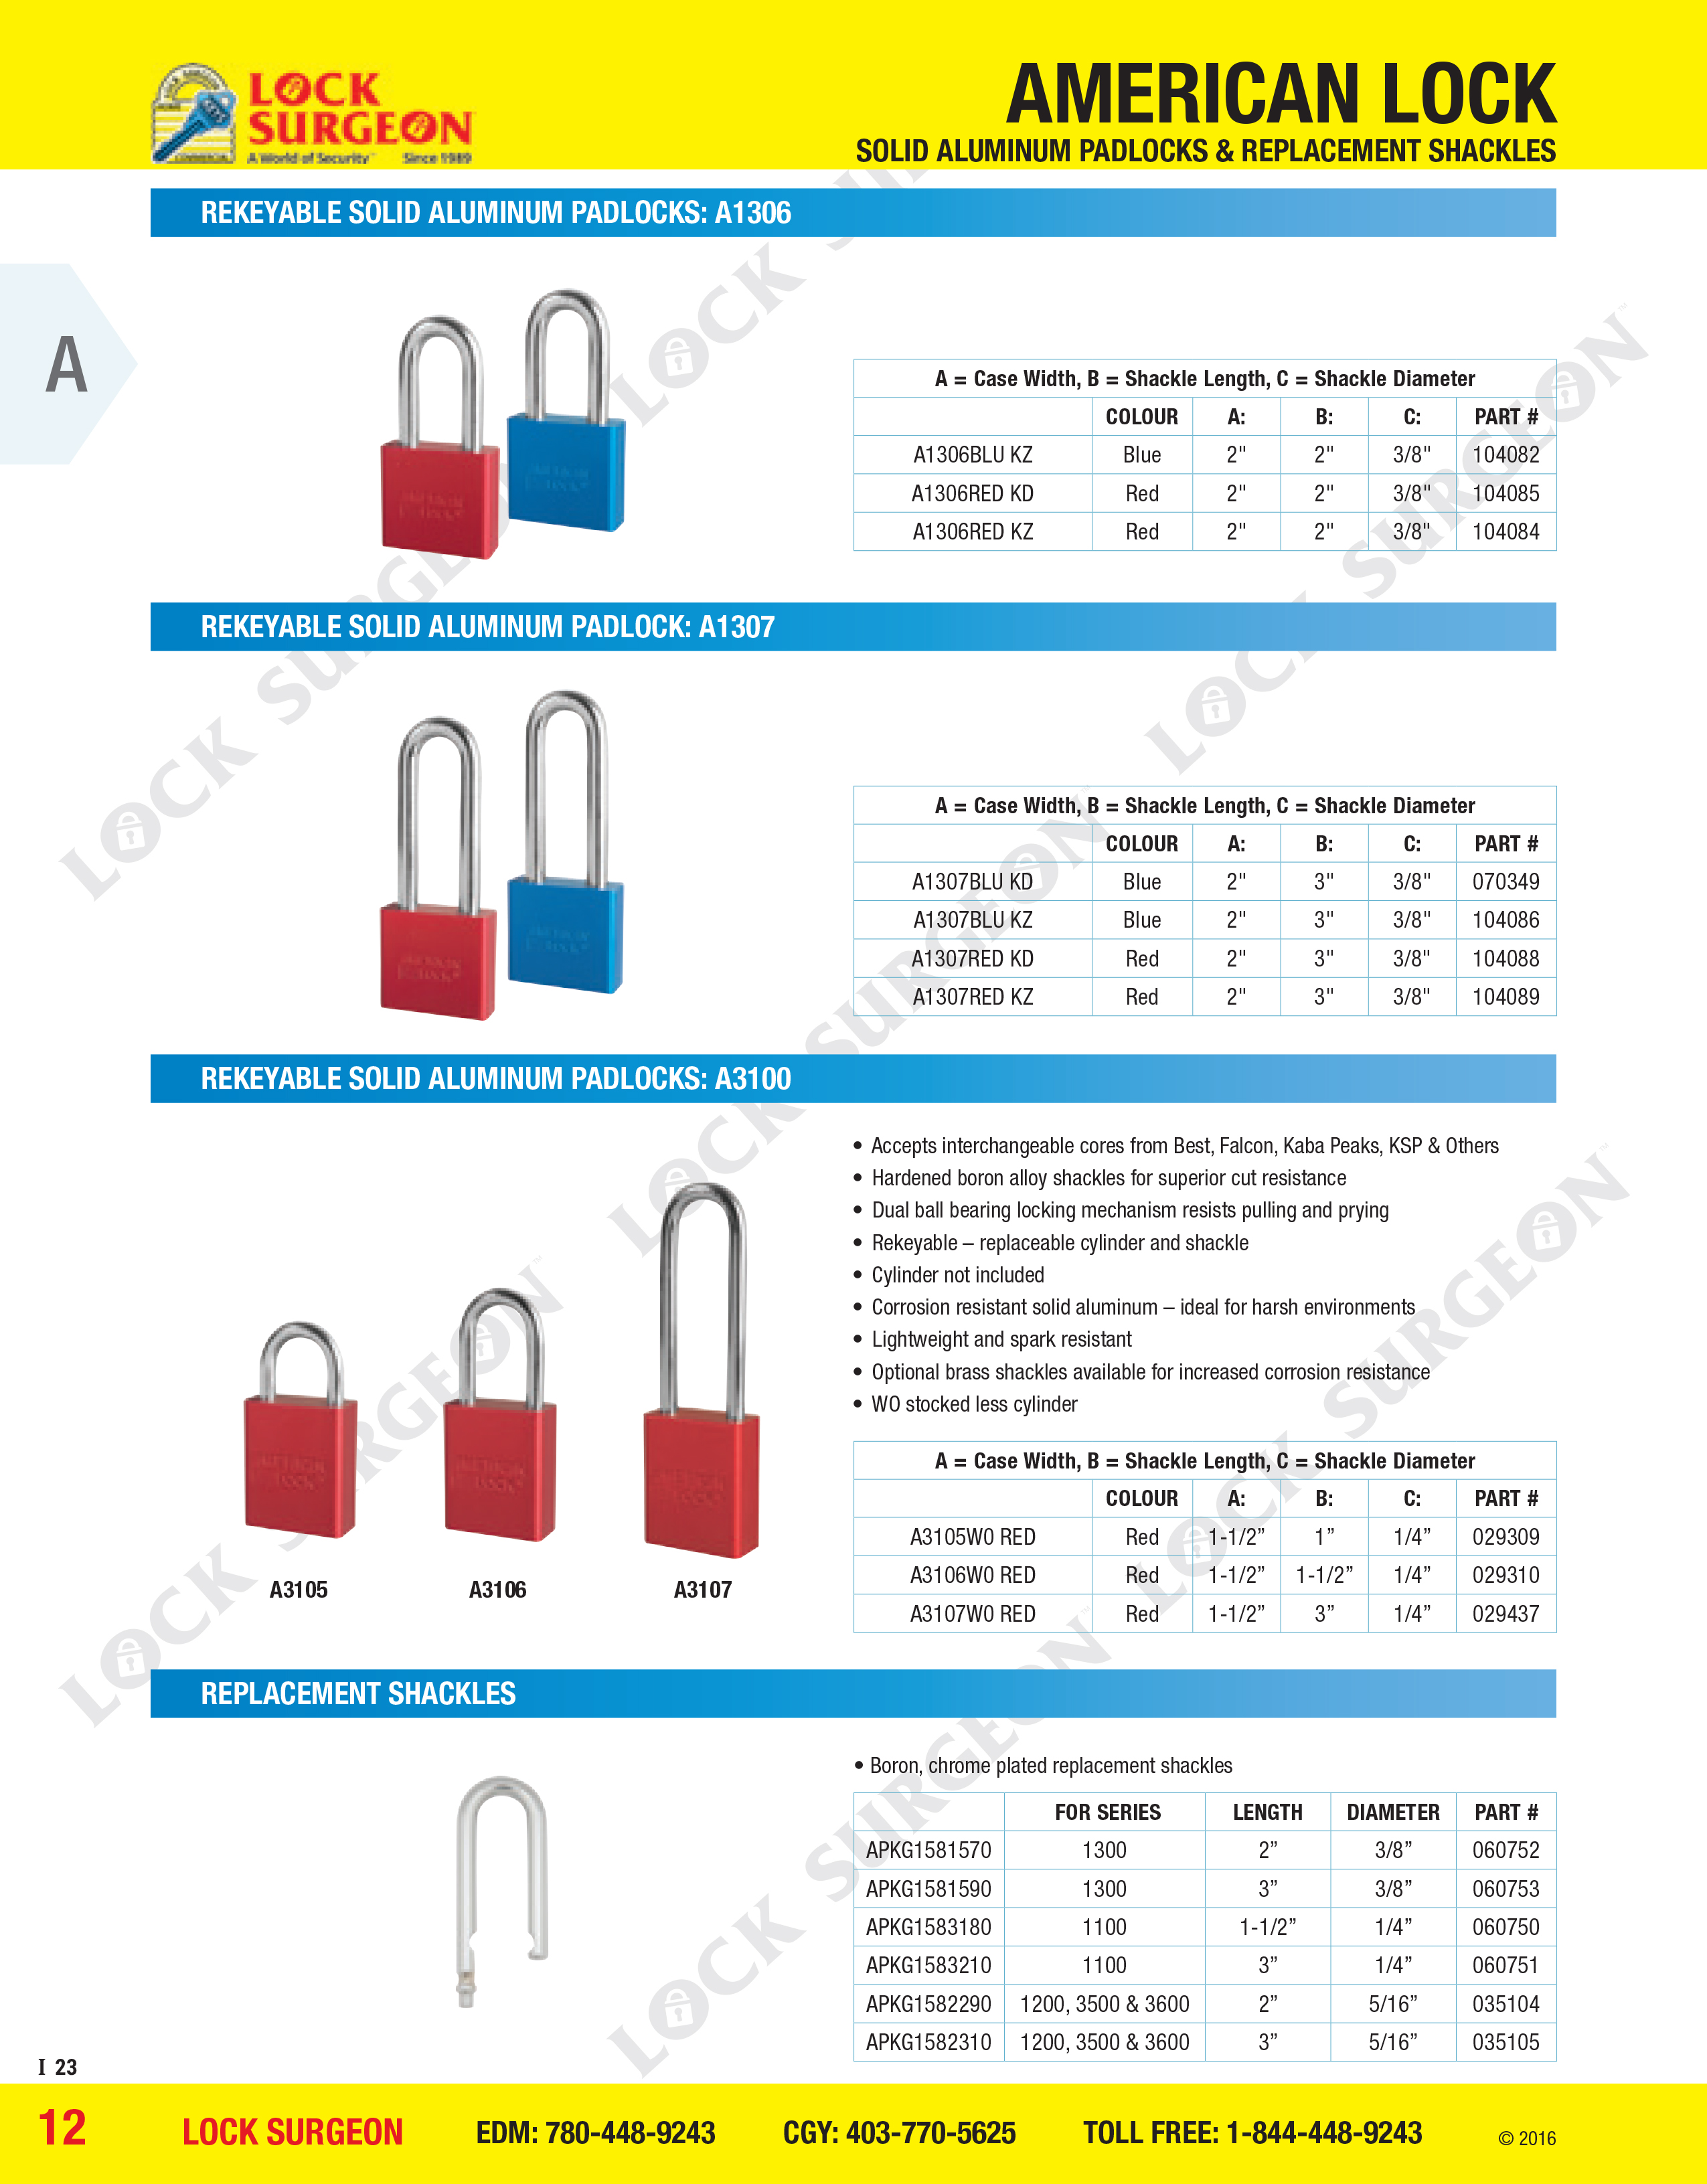 American Lock Rekeyable solid aluminium A1306 A1307 A3100 series & replacement shackles Acheson.